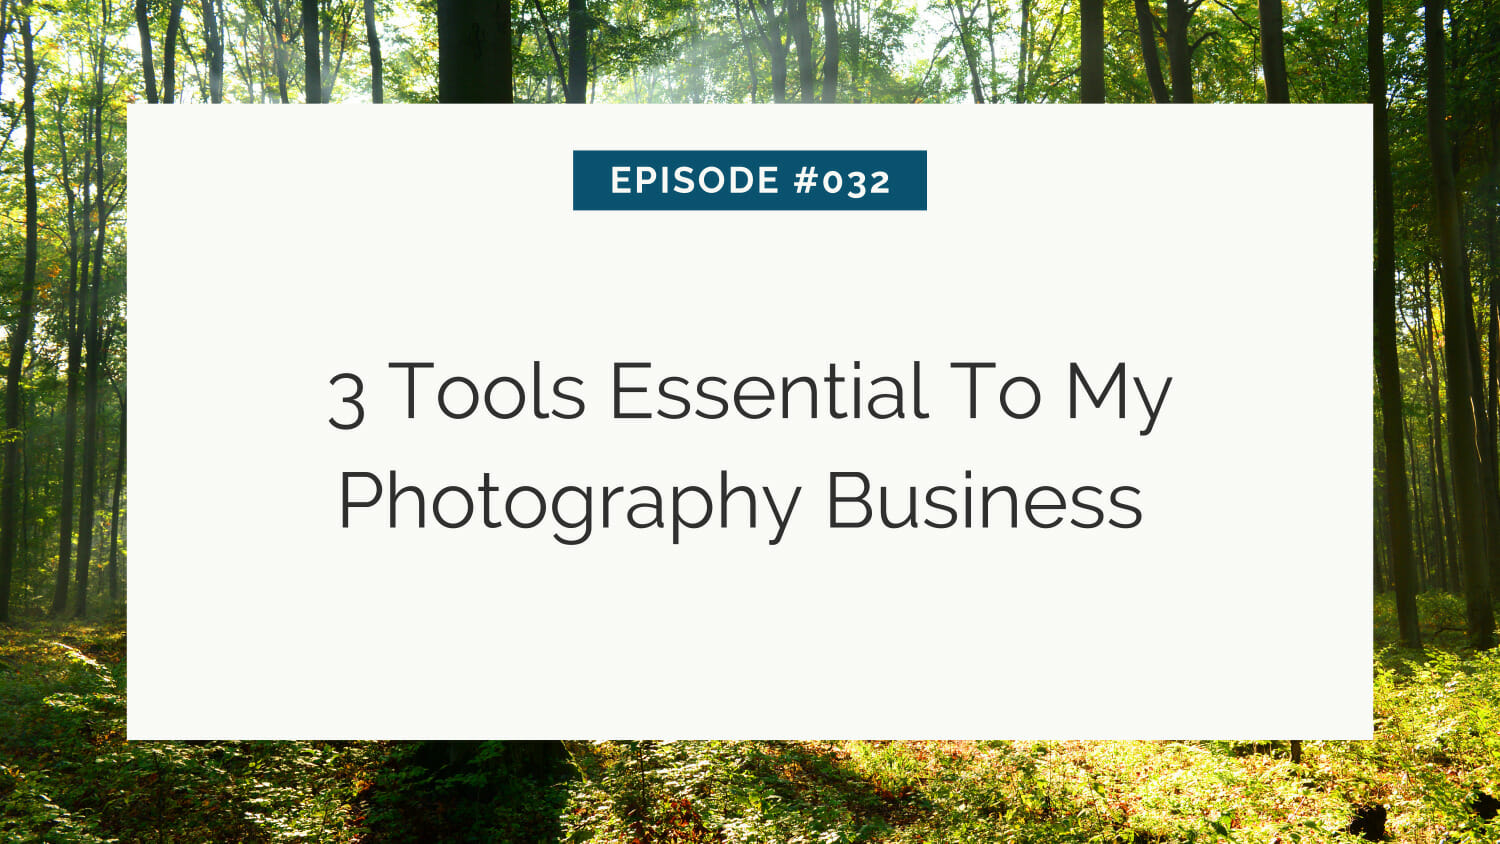 Slide presentation screen displaying the title "3 tools essential to my photography business" with an episode number and a forest background.